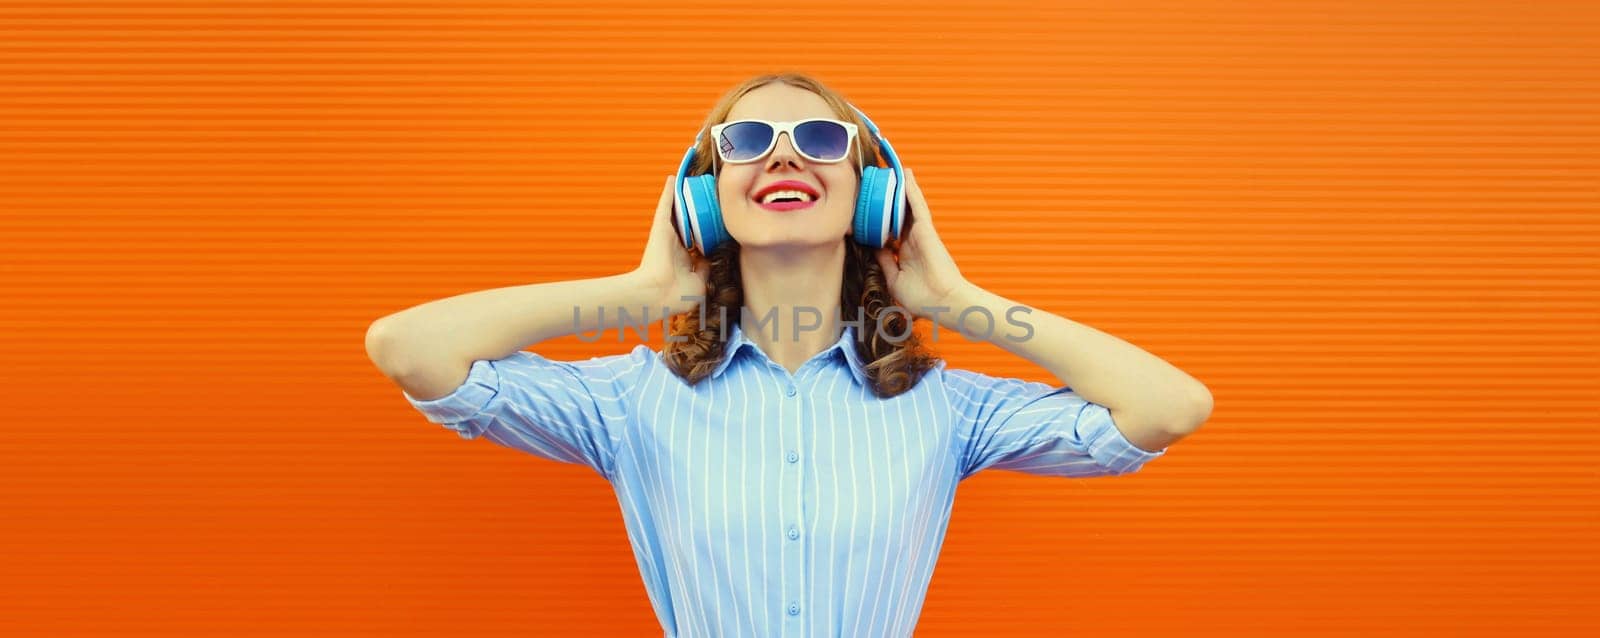 Happy modern happy young woman listening to music with headphones on bright orange background by Rohappy